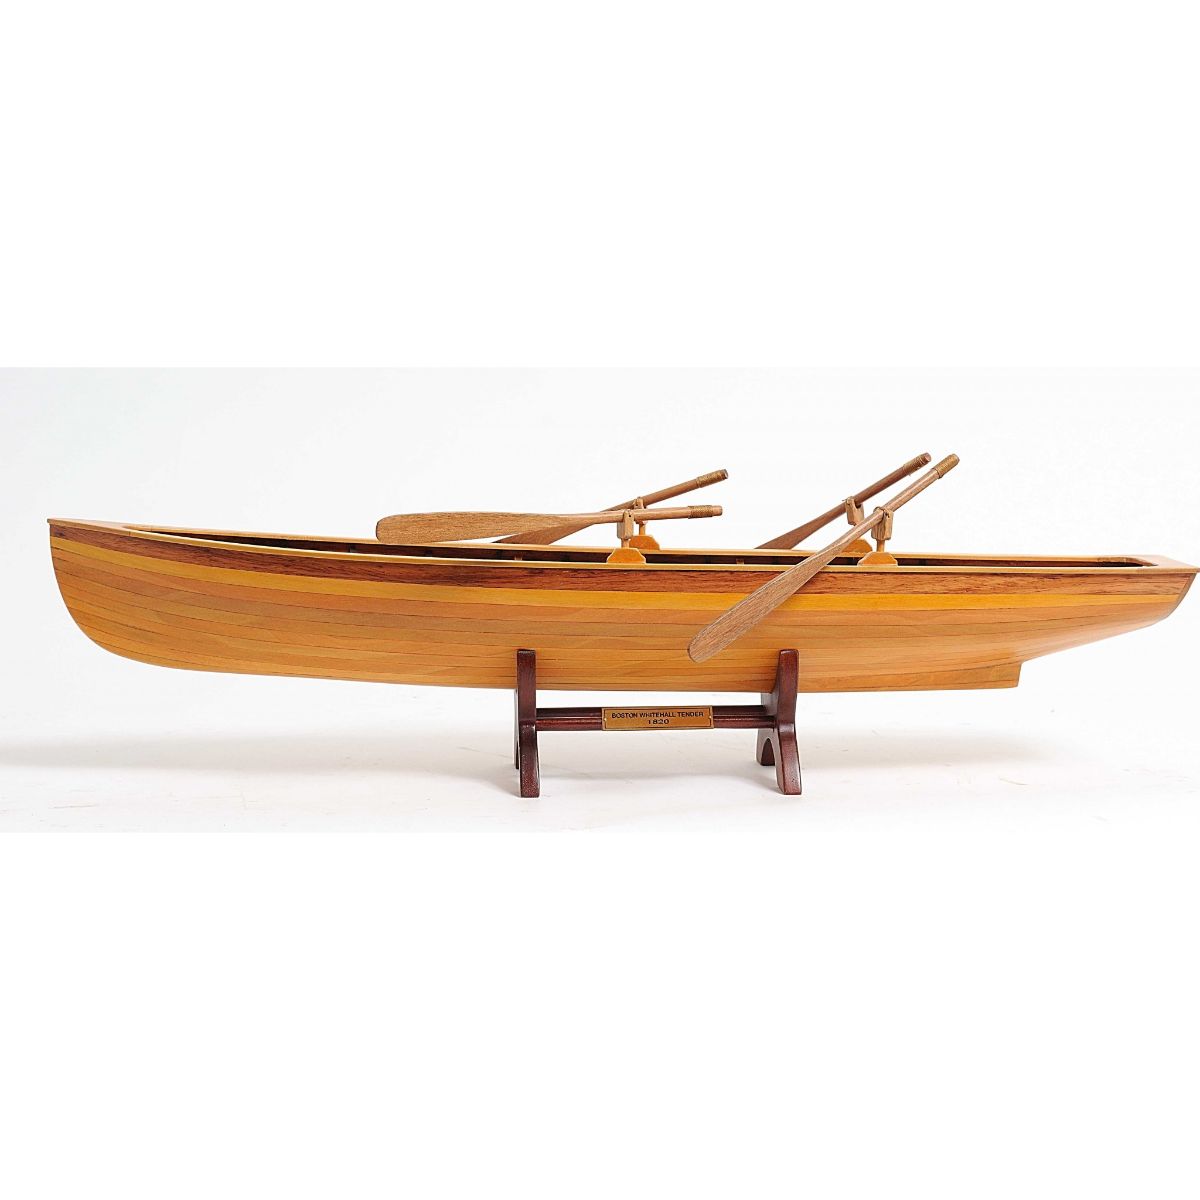 HomeRoots Wooden Boat Model with Interior Ribs, Oars, and Brass Nameplate -  24.5-in White in the Decorative Accessories department at